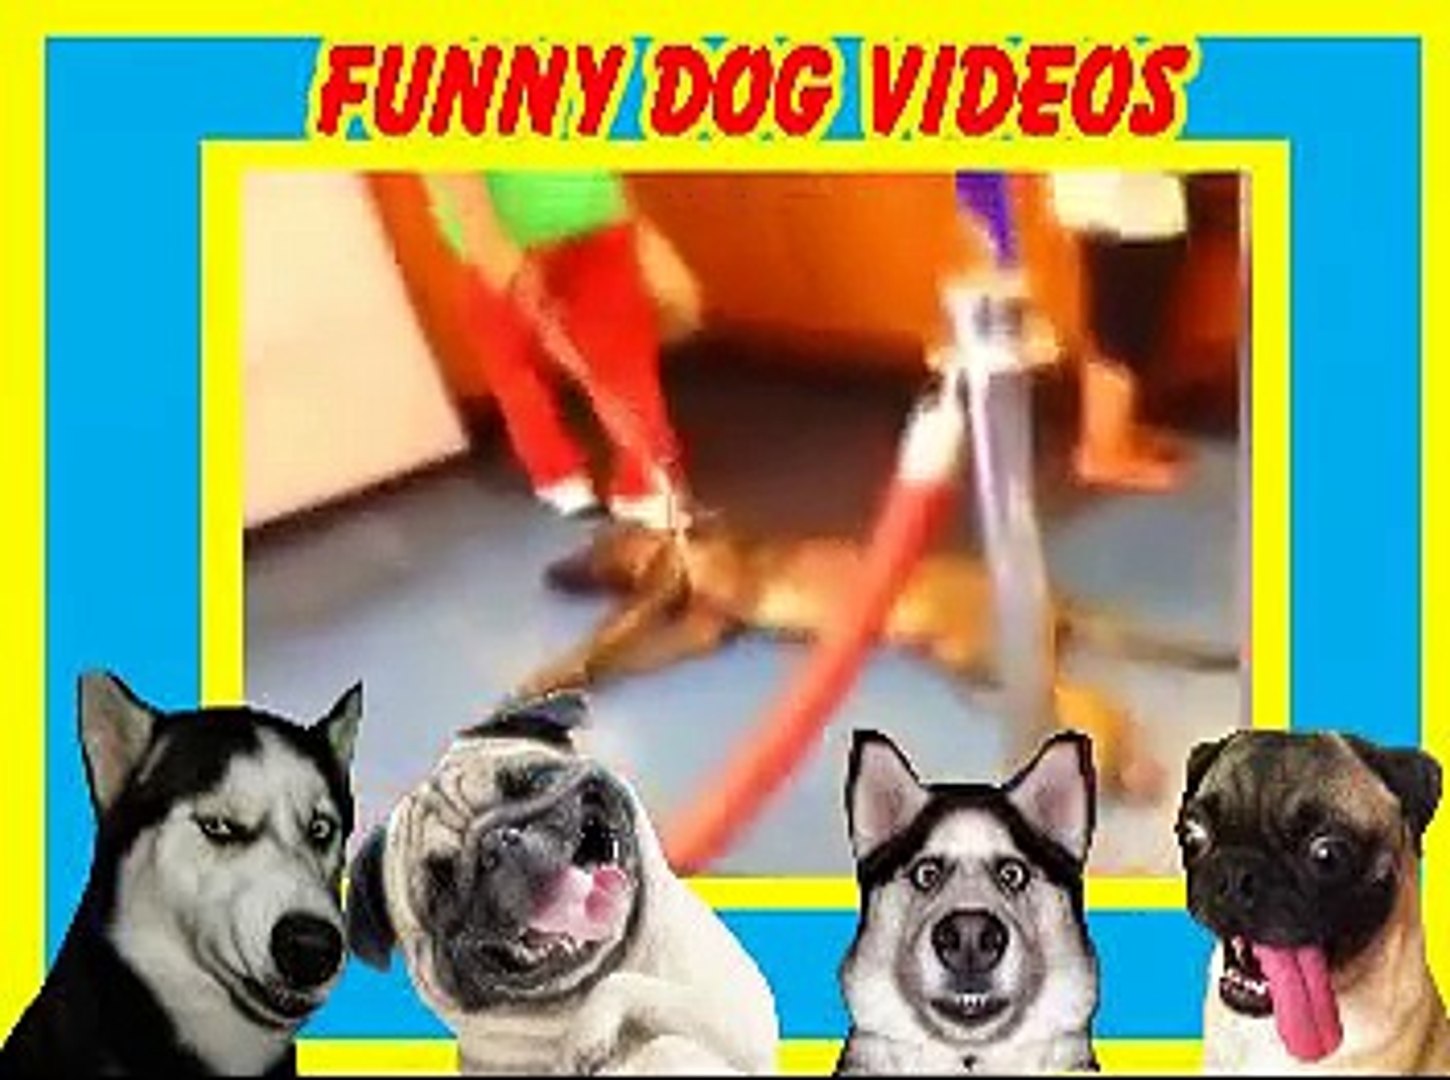 funny dog videos - cute dog videos - dog videos - funny videos of dogs